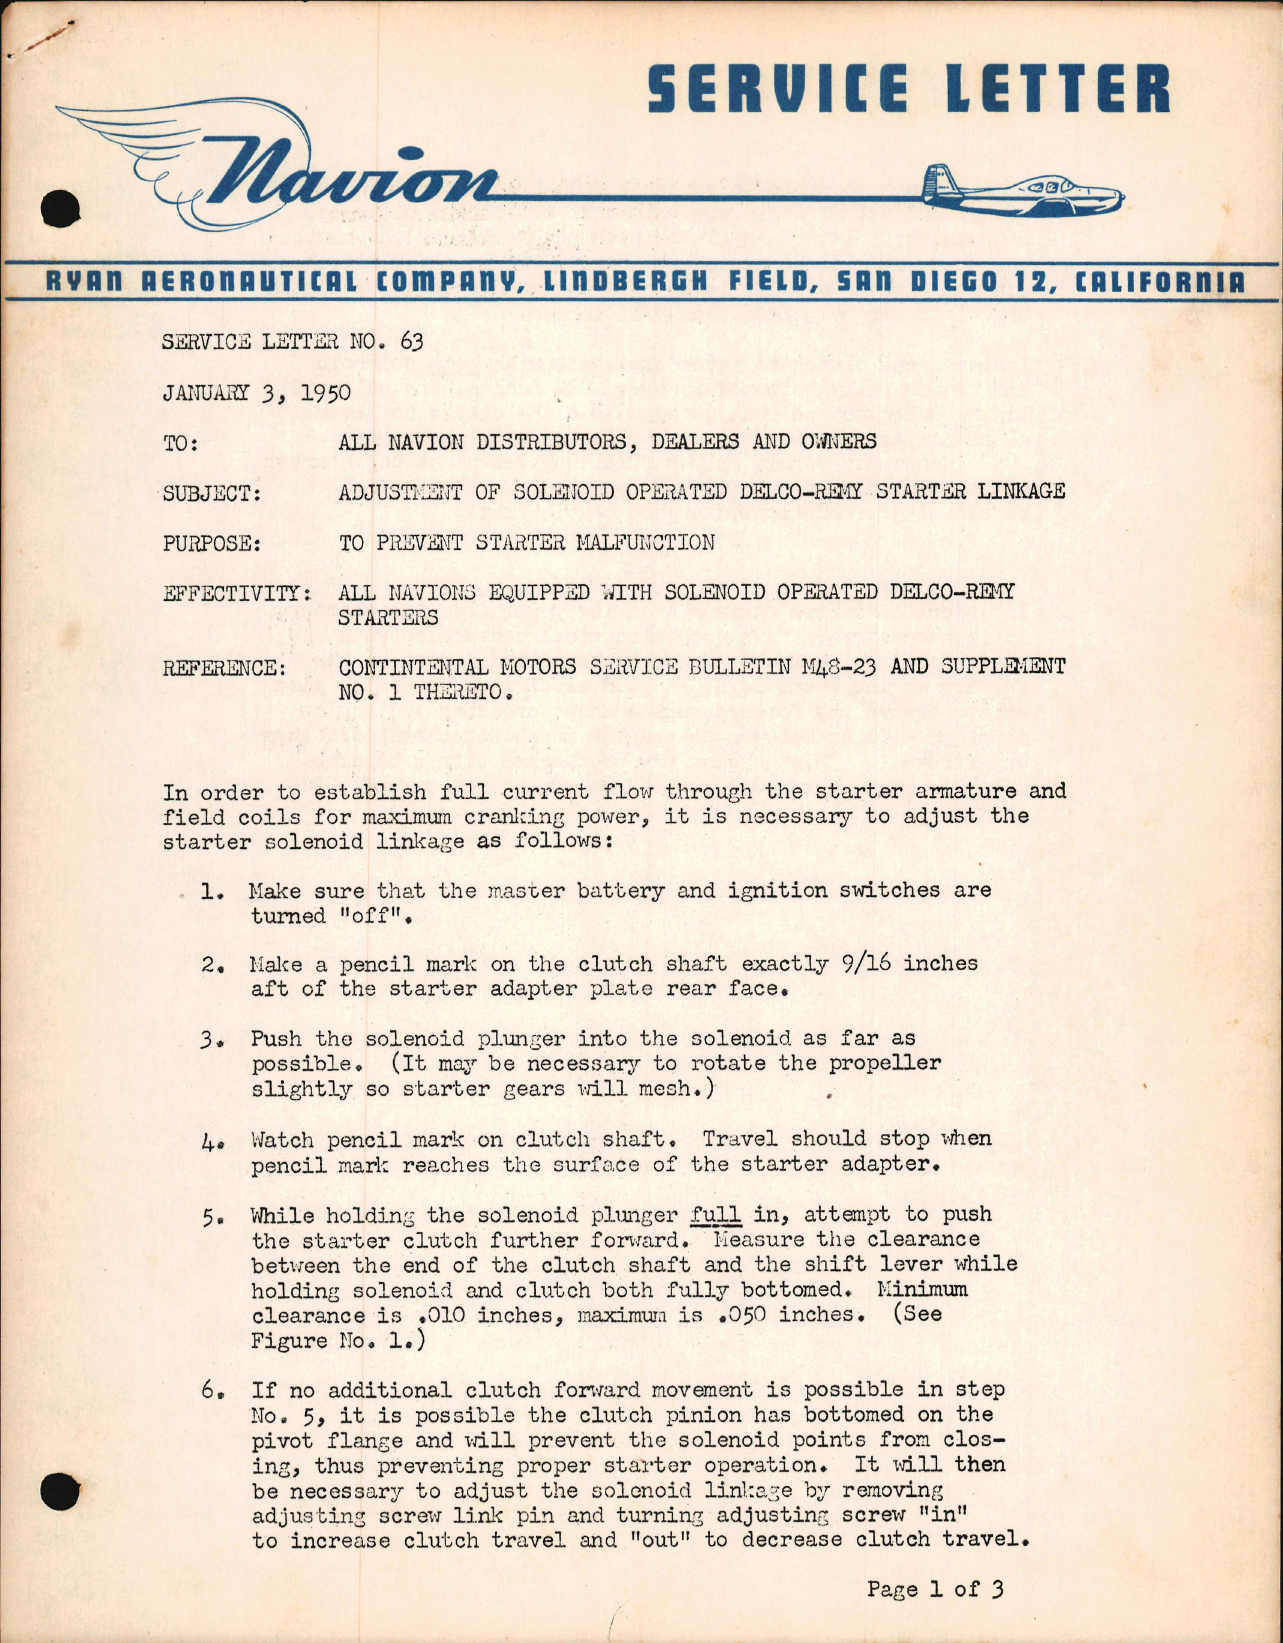 Sample page 1 from AirCorps Library document: Adjustment of Solenoid Operated Delco-Remy Starter Linkage